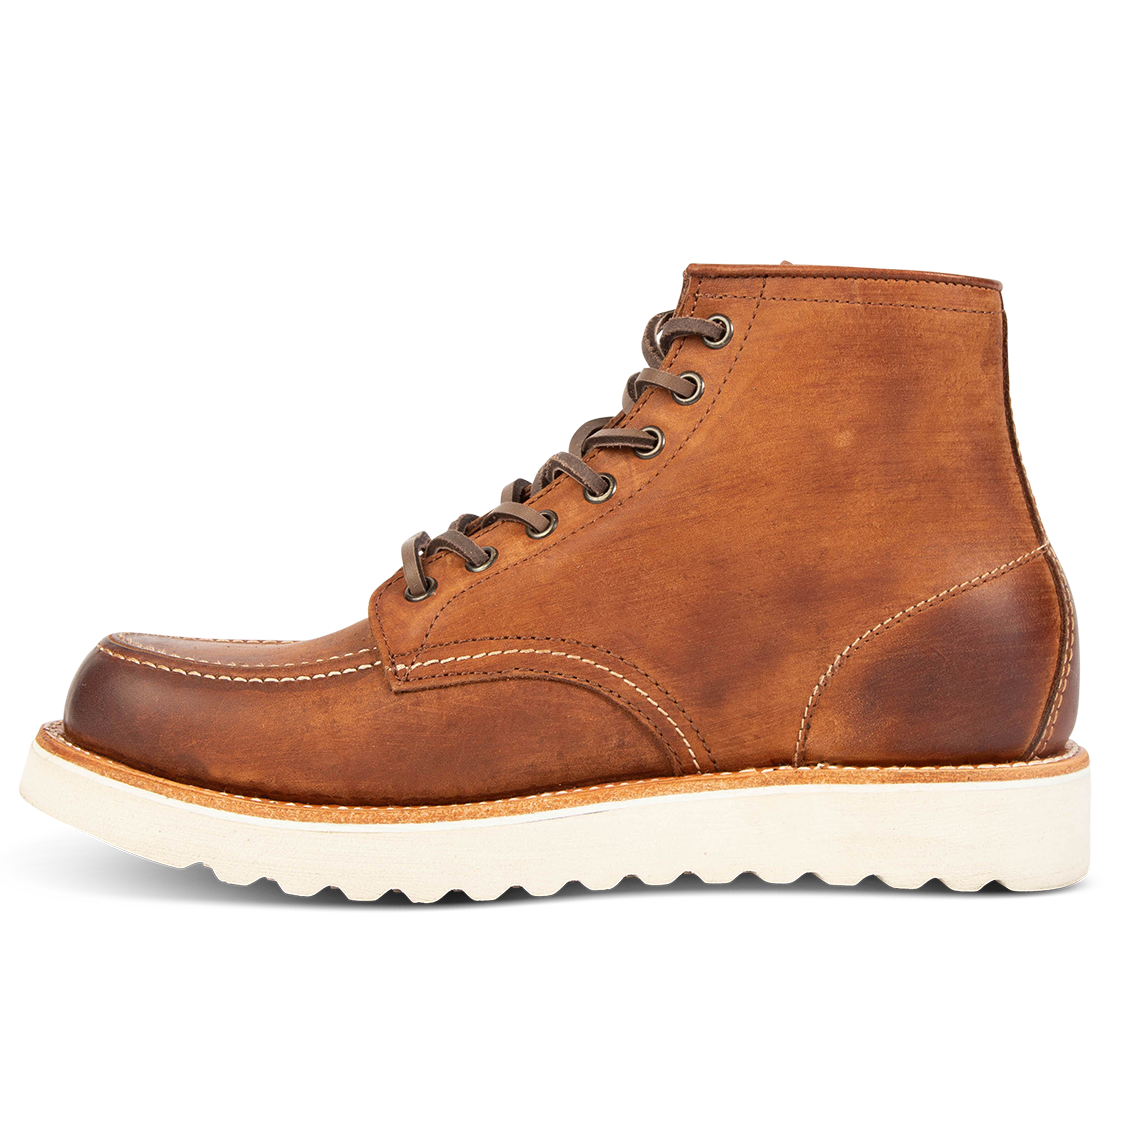 Inside view showing leather body and soft sole on FREEBIRD men's Carbon cognac shoe